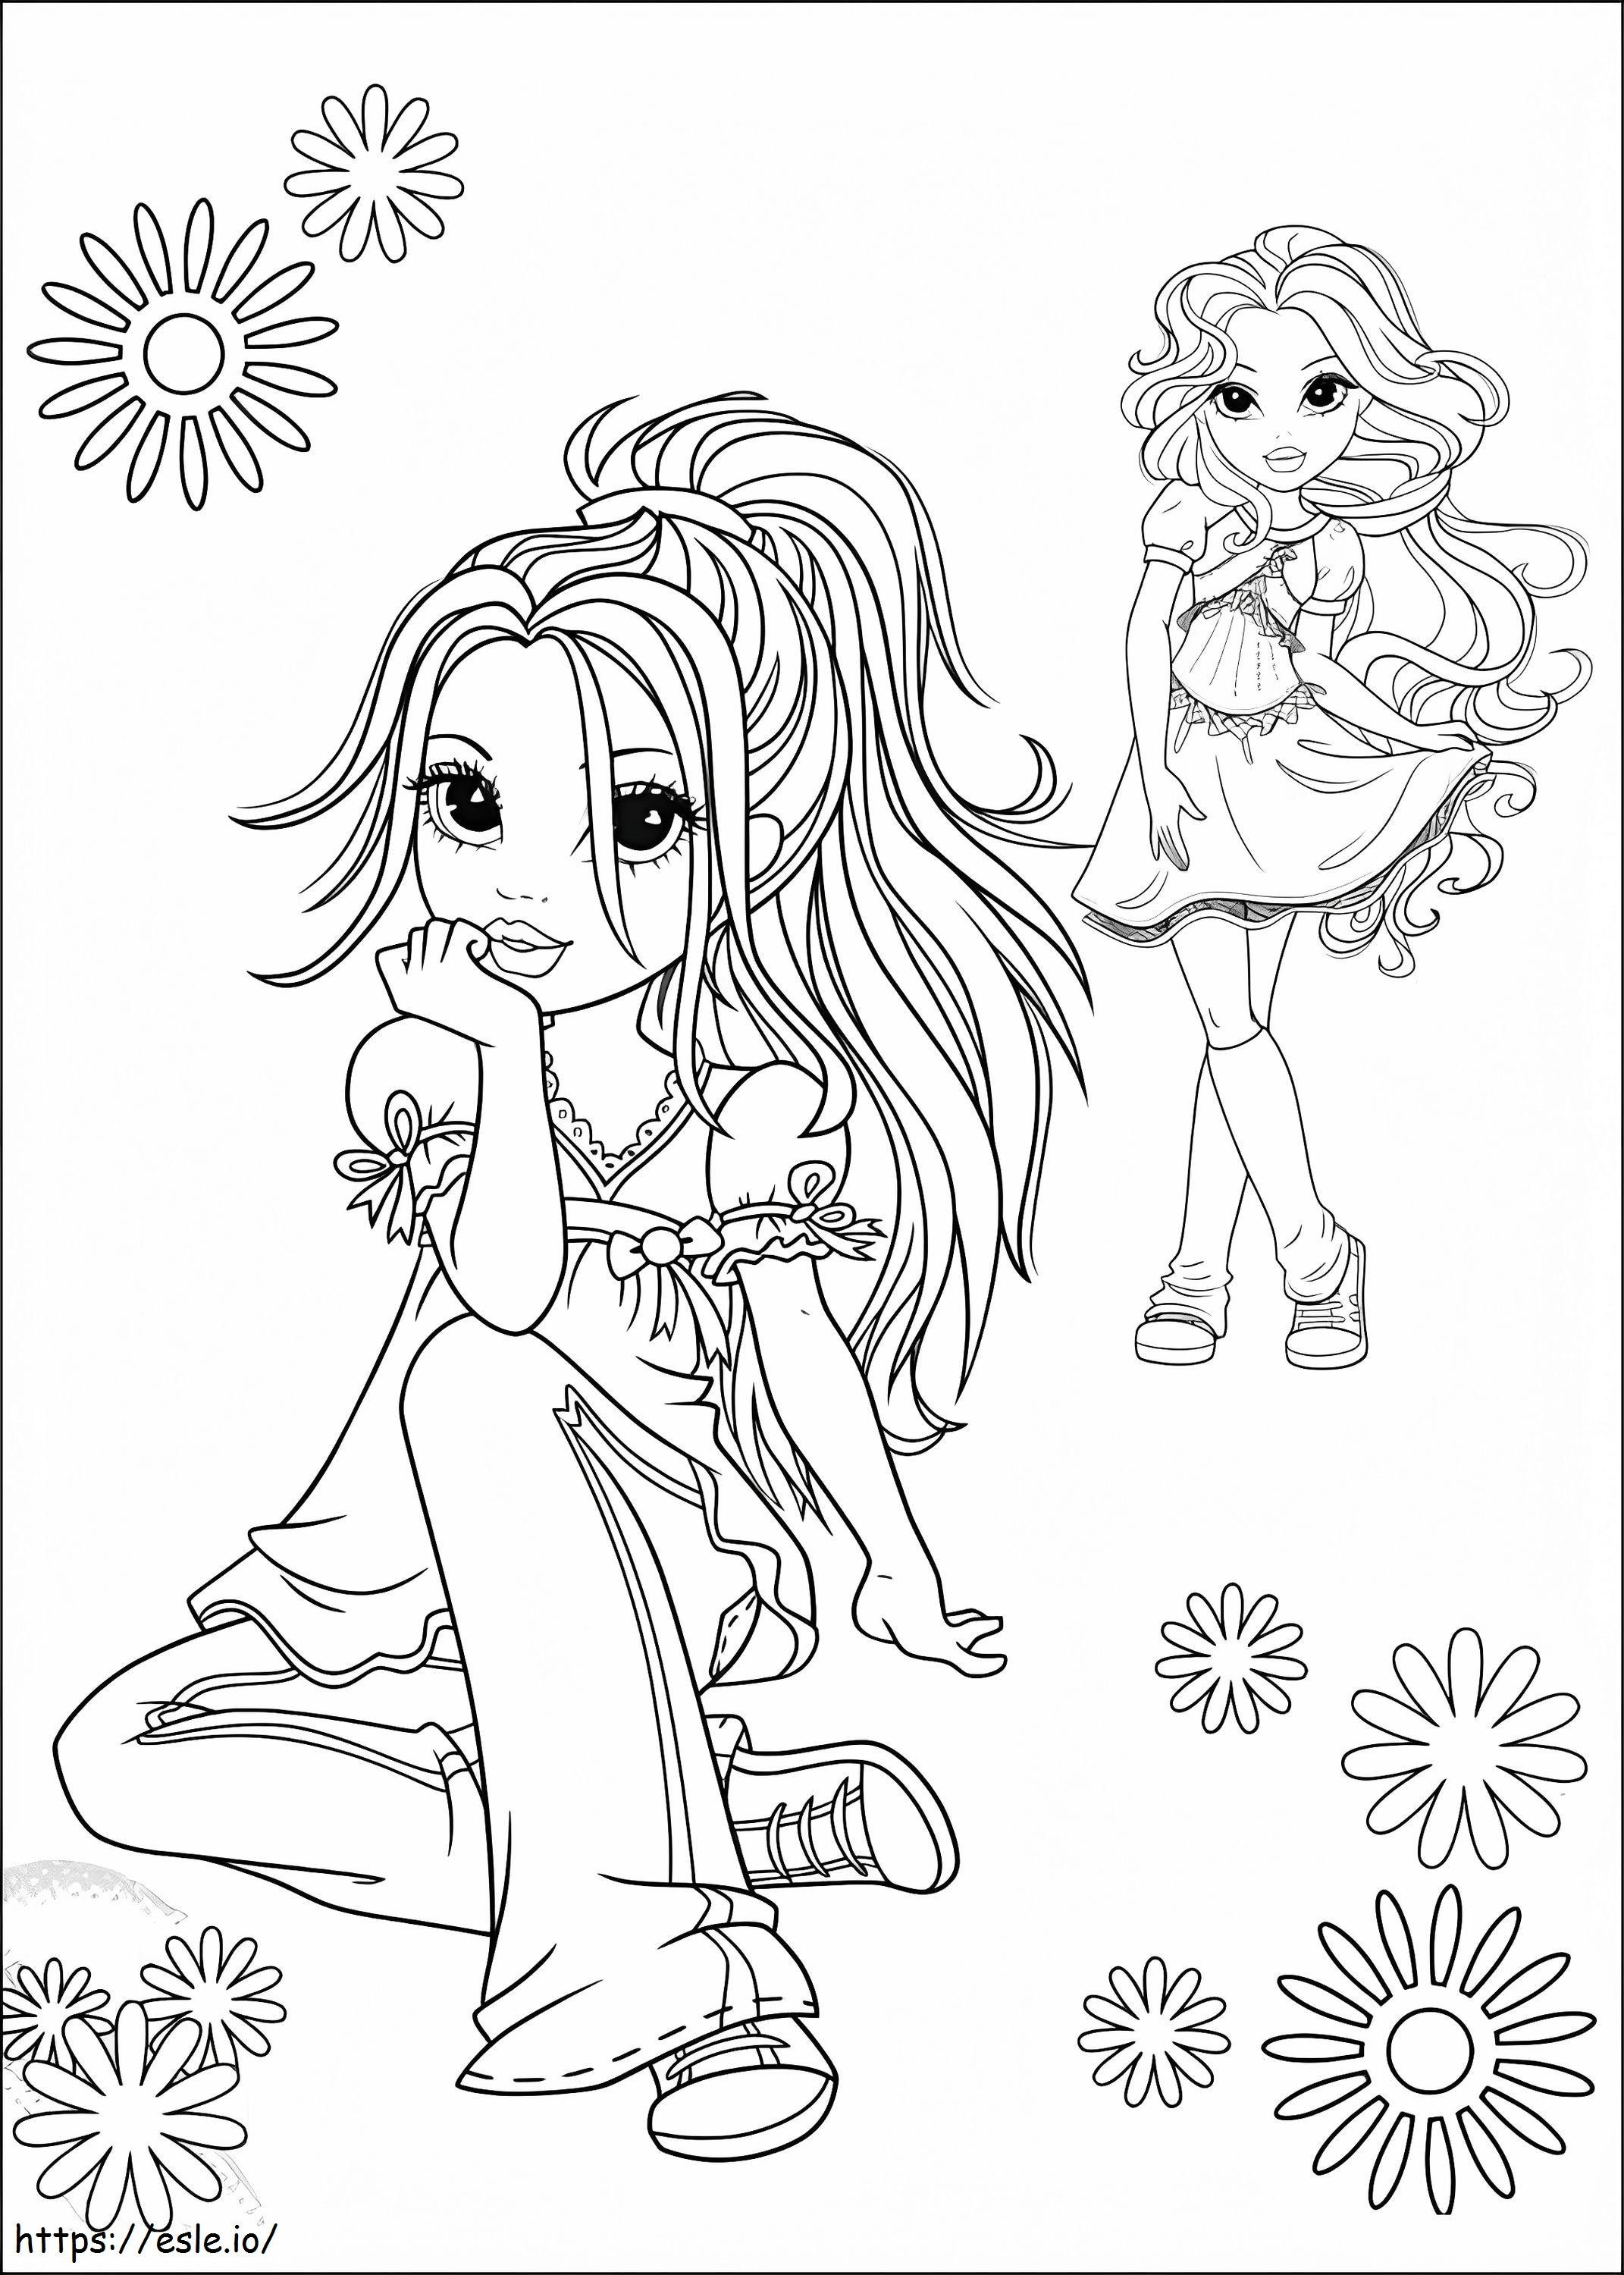 Moxie Girlz 13 coloring page